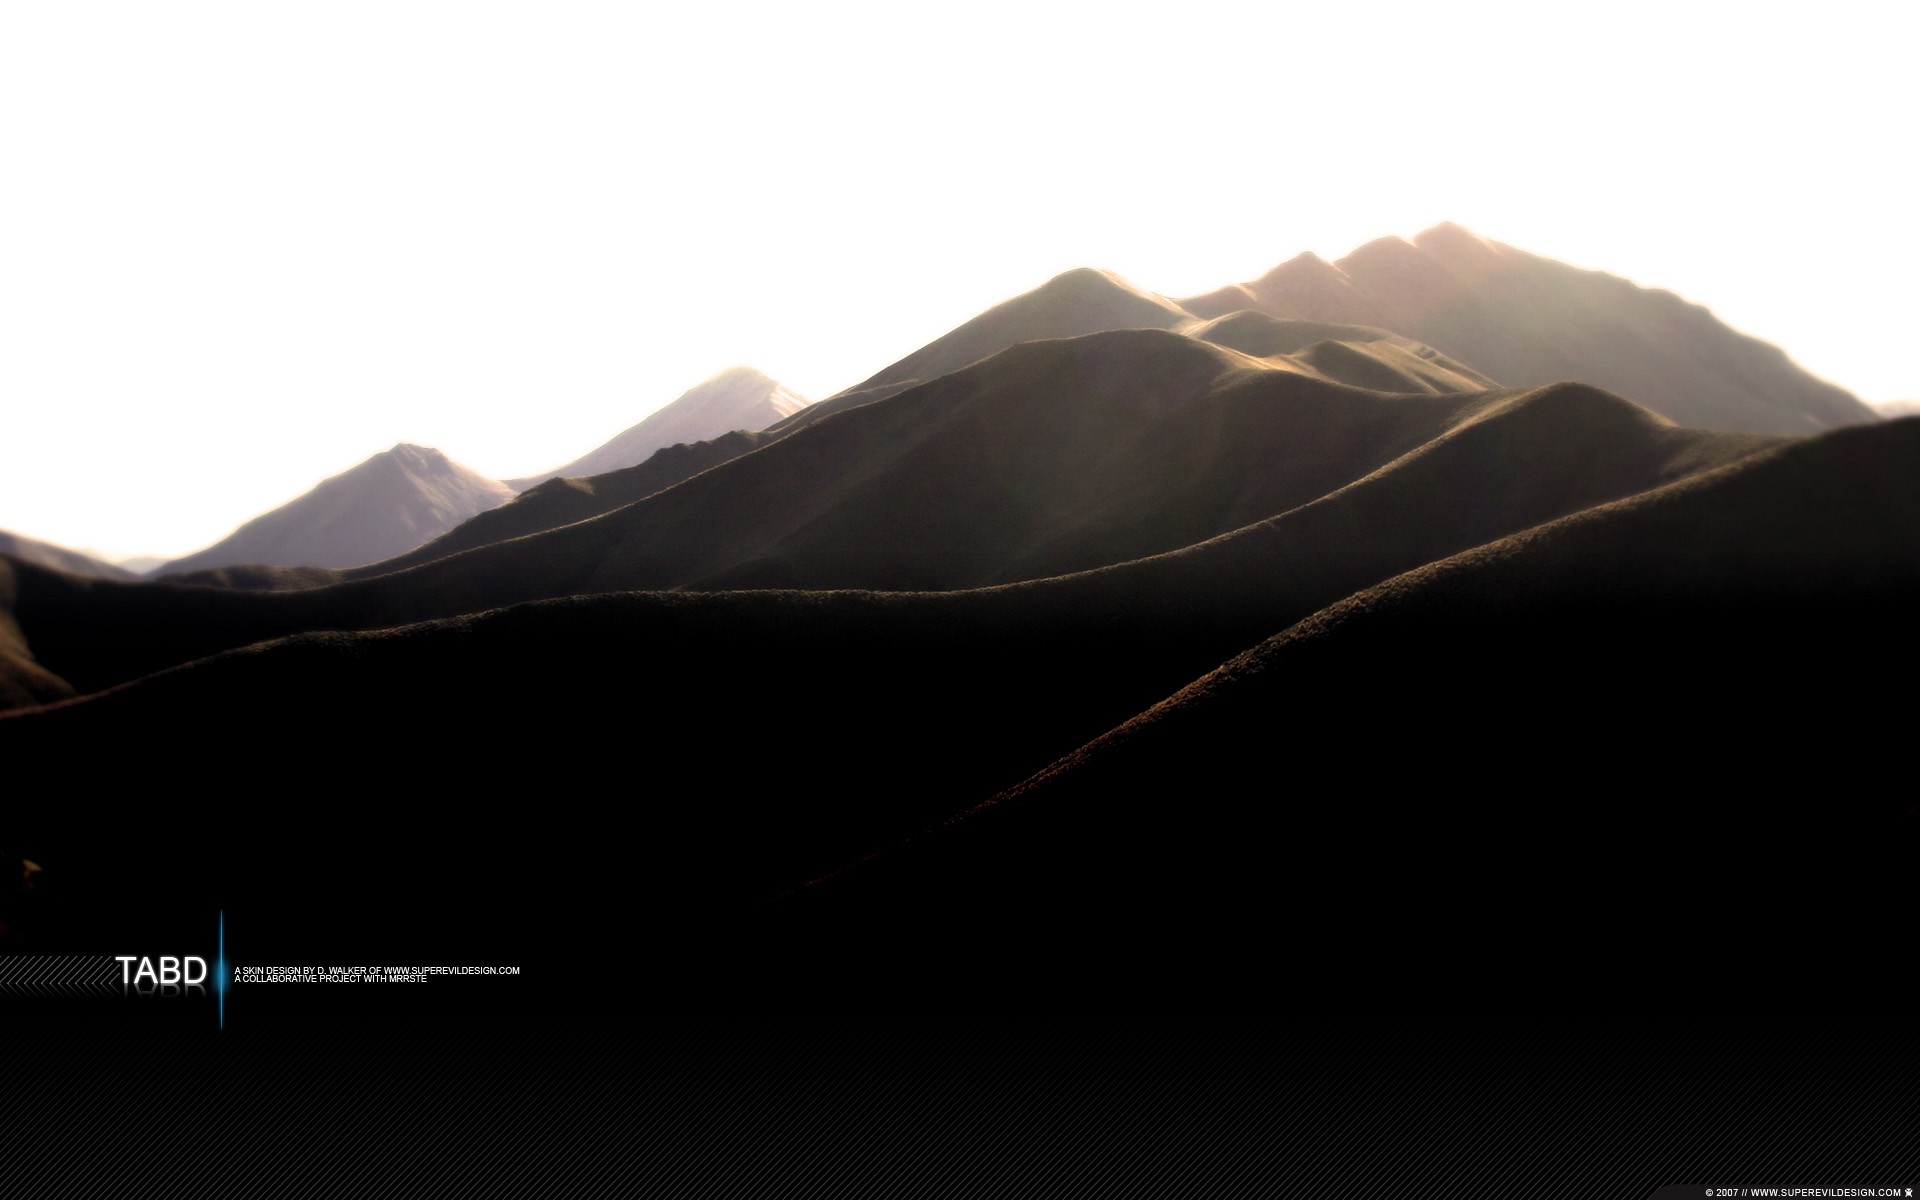 General 1920x1200 landscape mountains nature typography dark low light watermarked 2007 (Year)